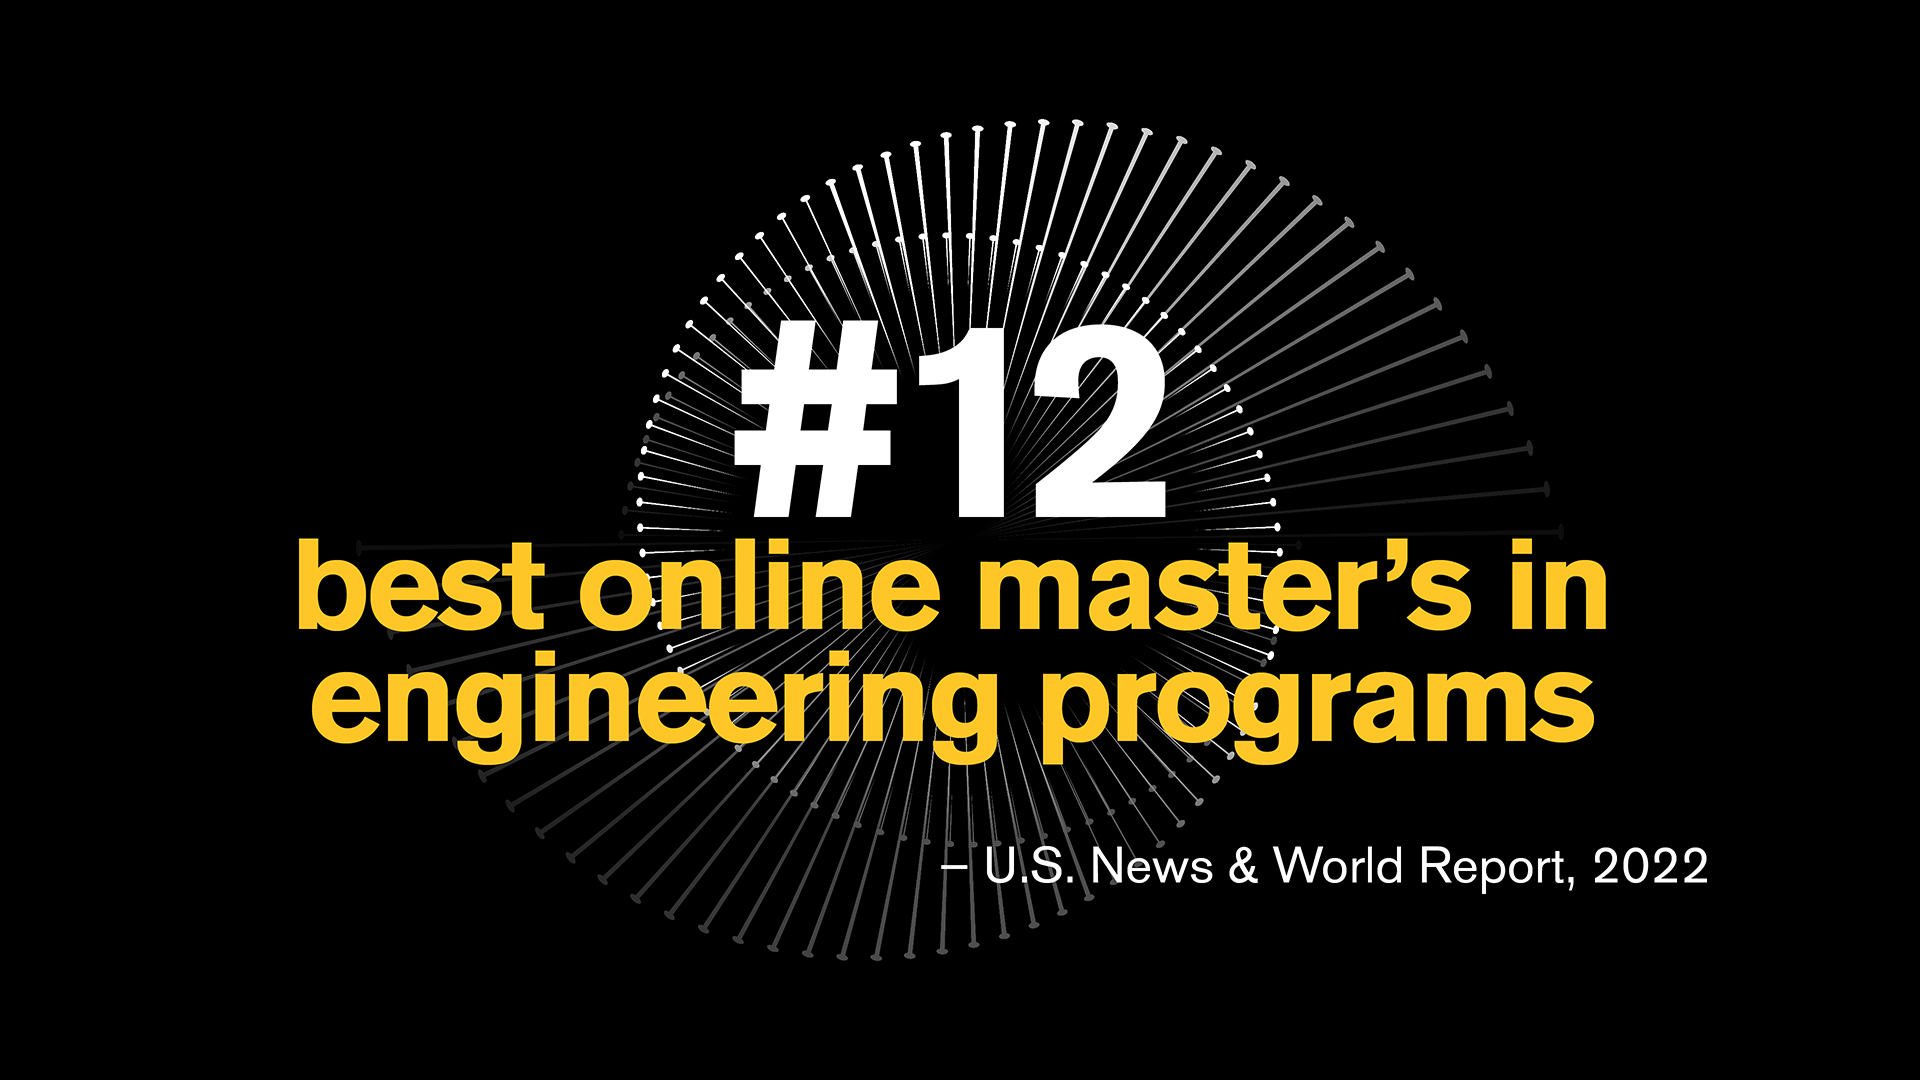 ASU’s online graduate engineering programs ranked among the nation’s best